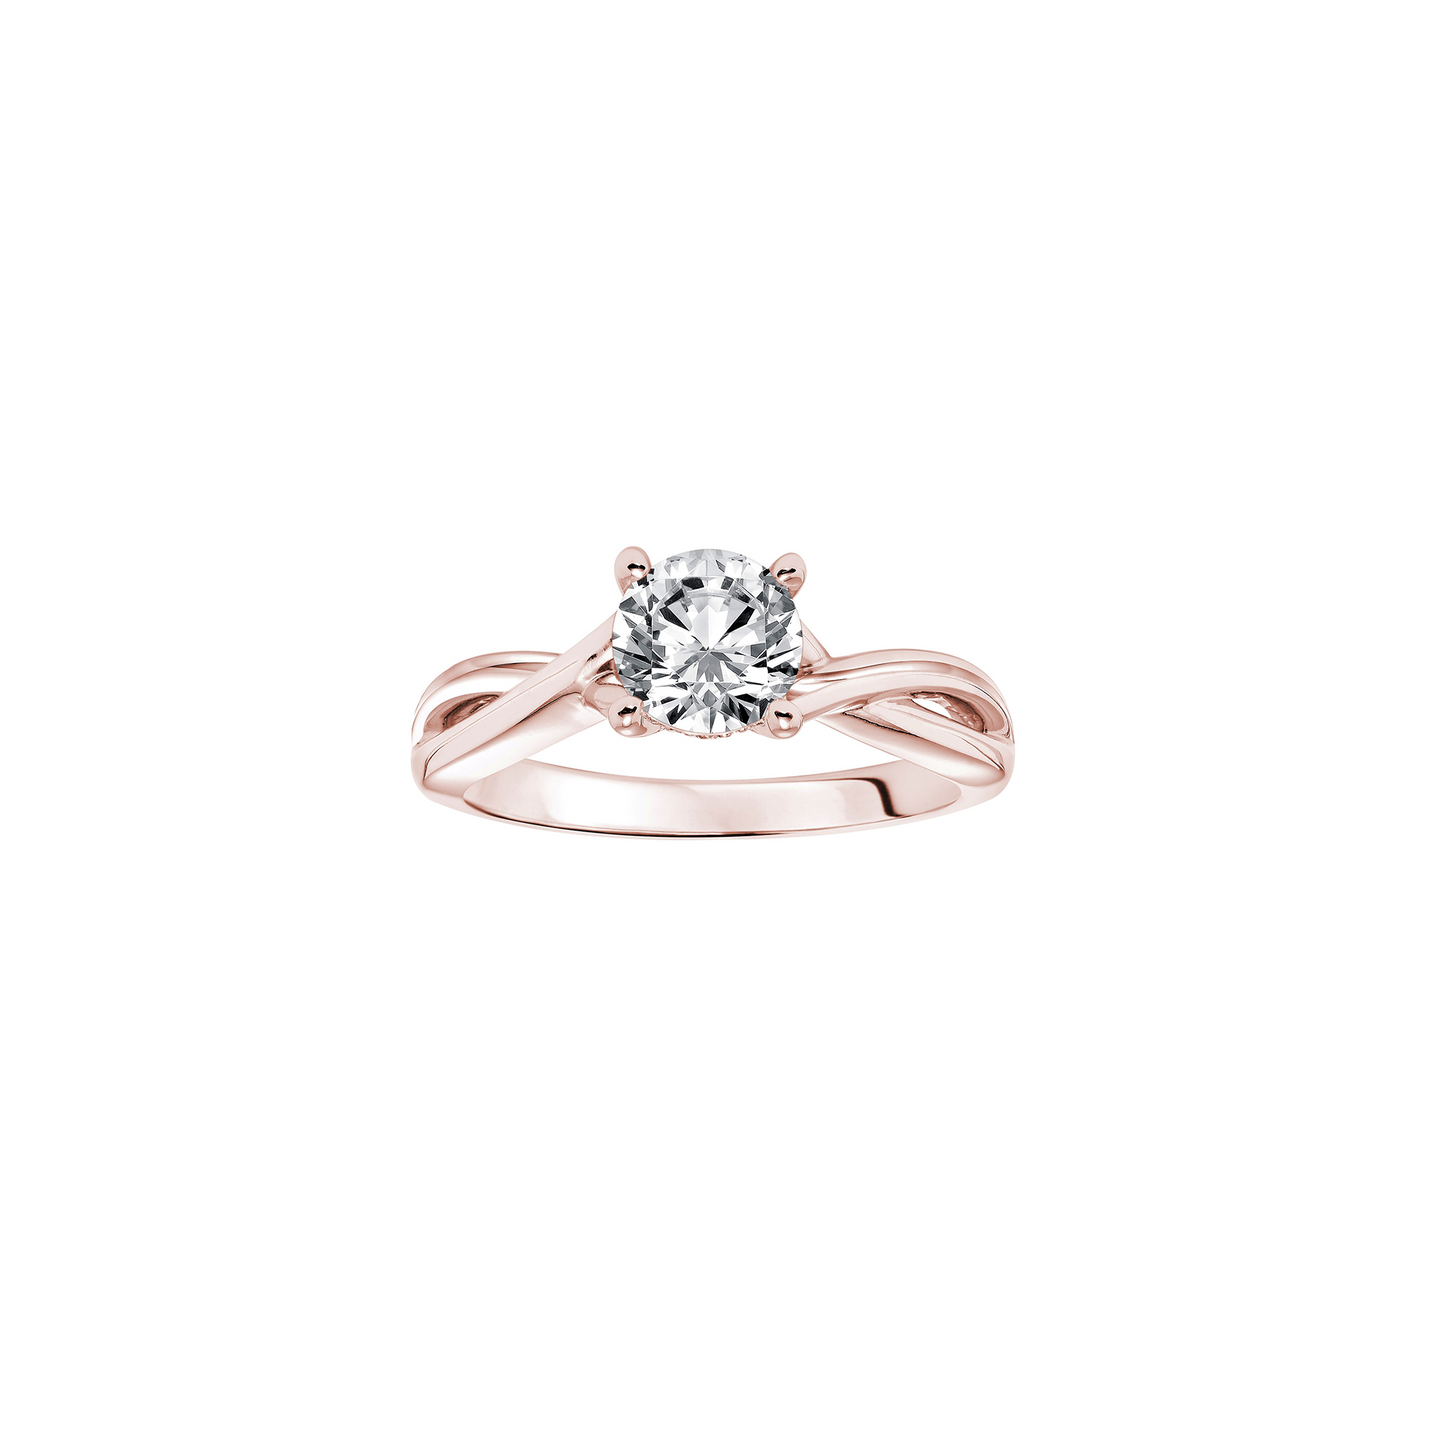 Fink's Exclusive Round Diamond and Twisted Shank Engagement Ring